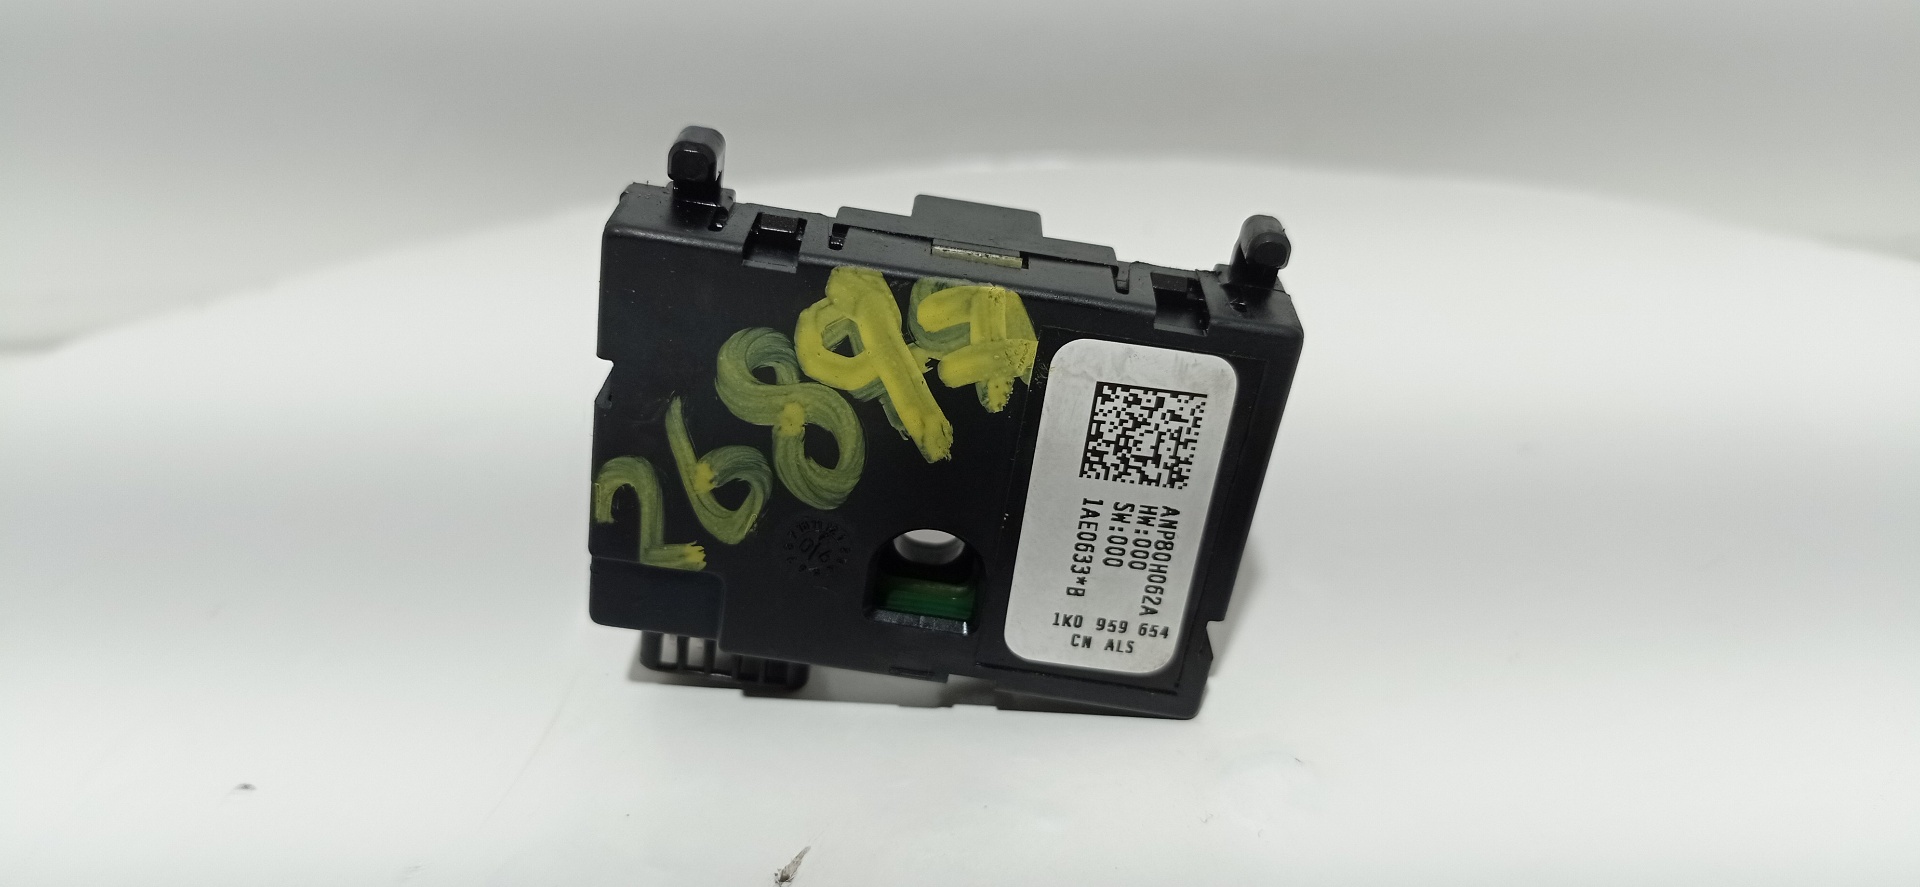 CHEVROLET 3 generation (2004-2010) Other Control Units 1K0959654 25367897